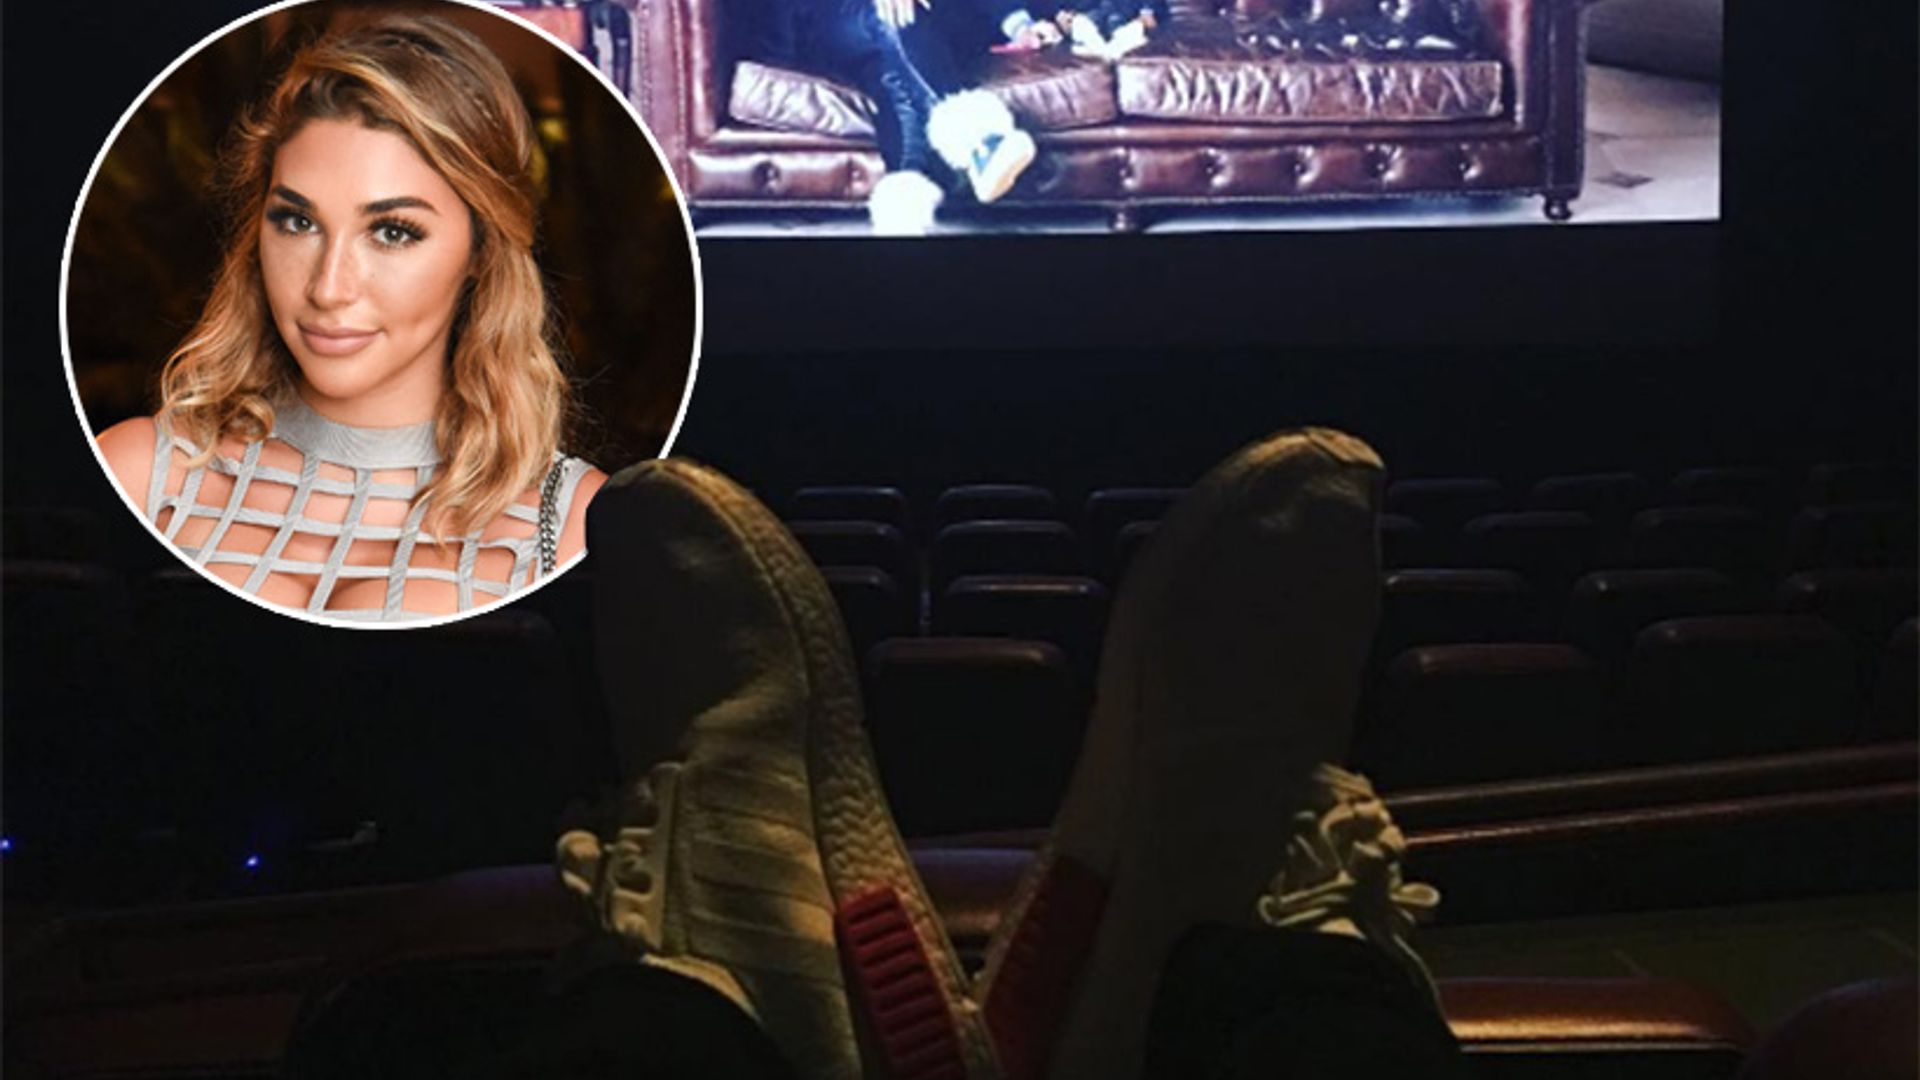 Justin Bieber rents out entire cinema screening room for date with Chantel Jeffries